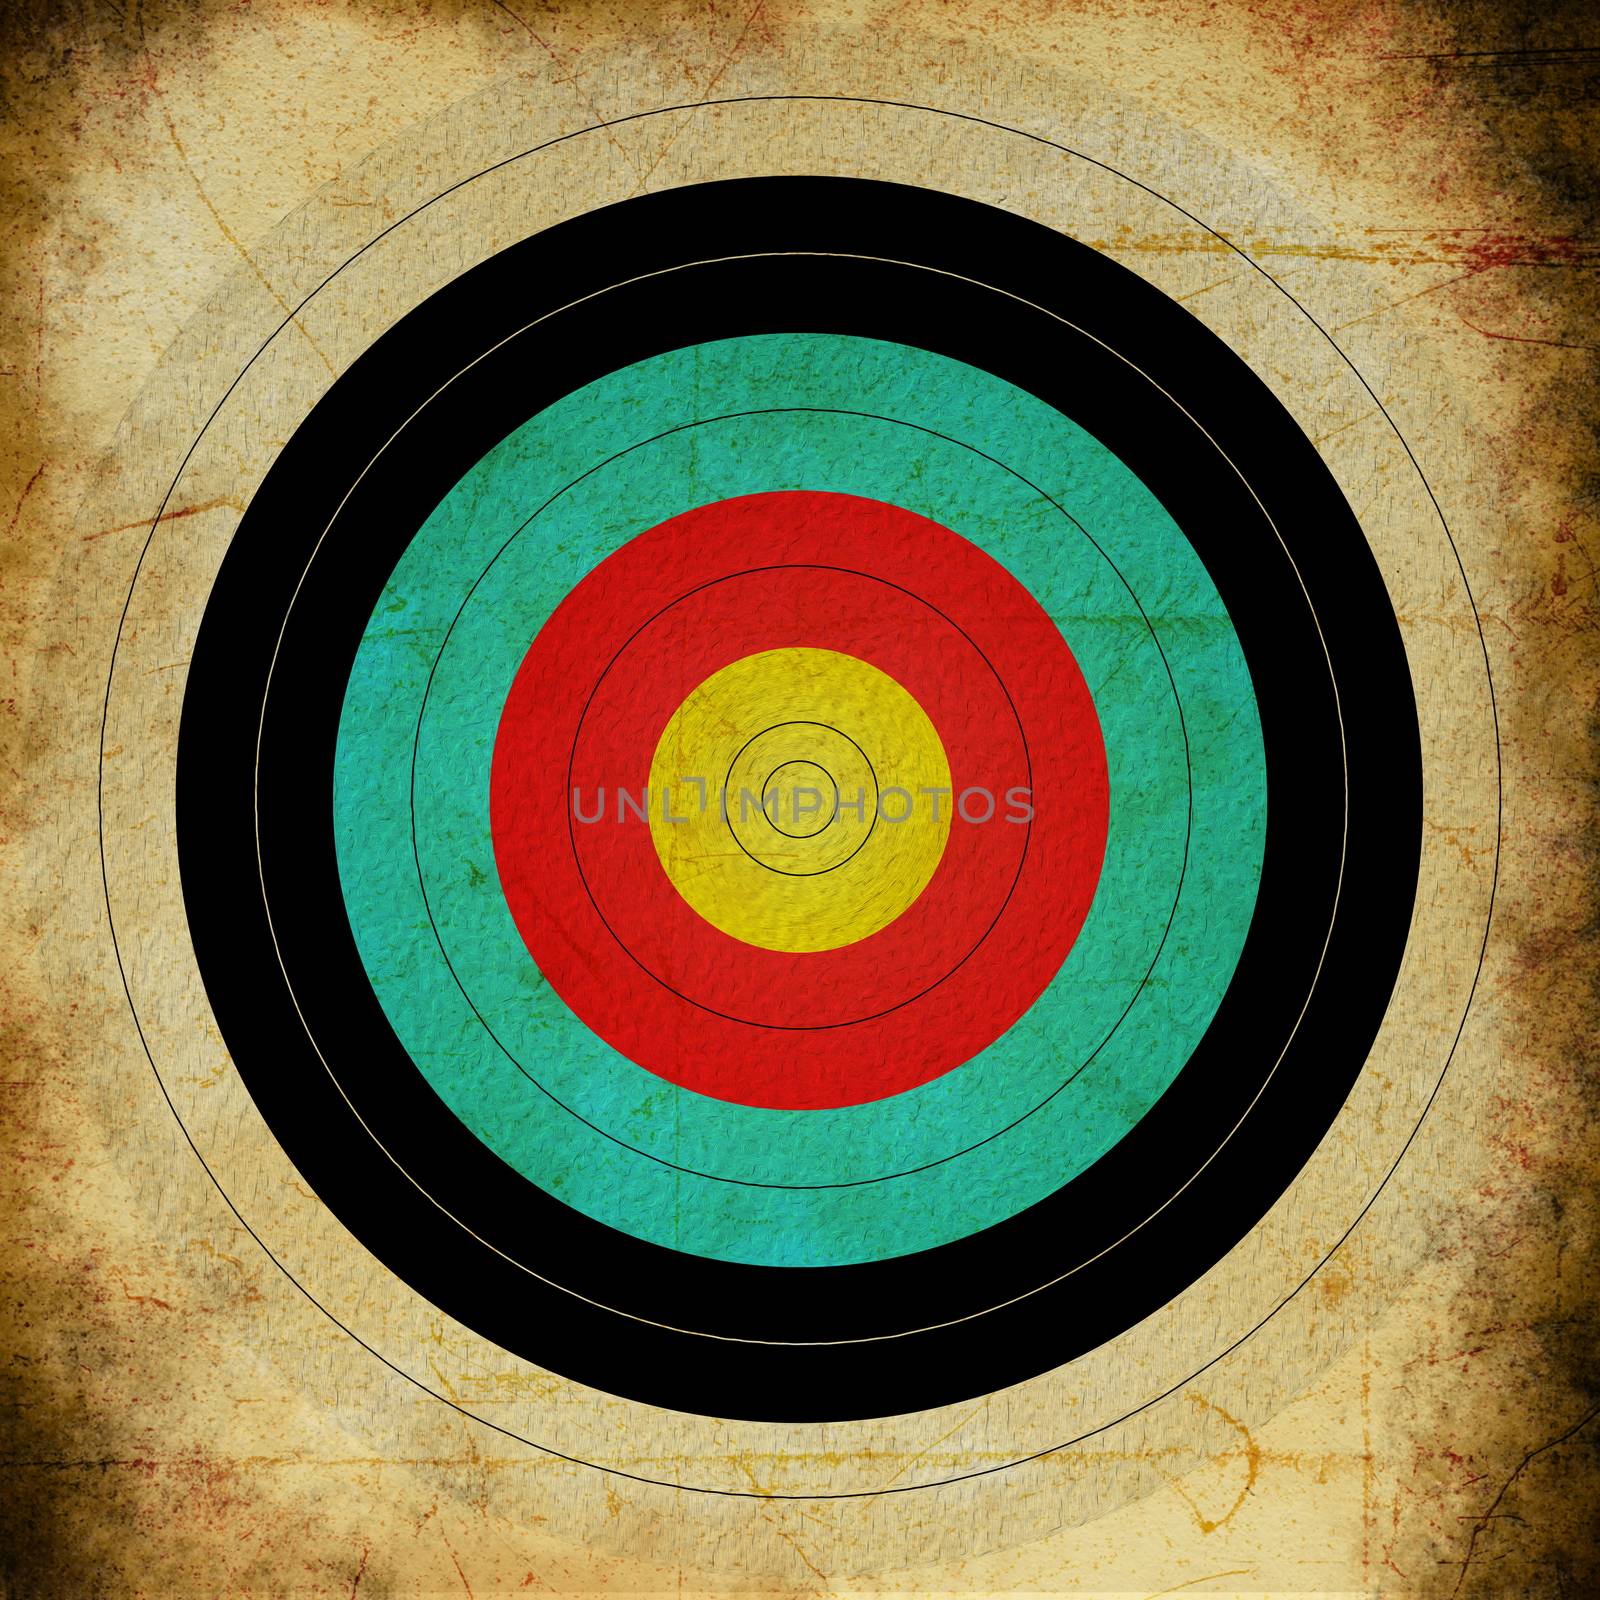 texture, vintage background of the bullseye design on grunge pap by tor00722